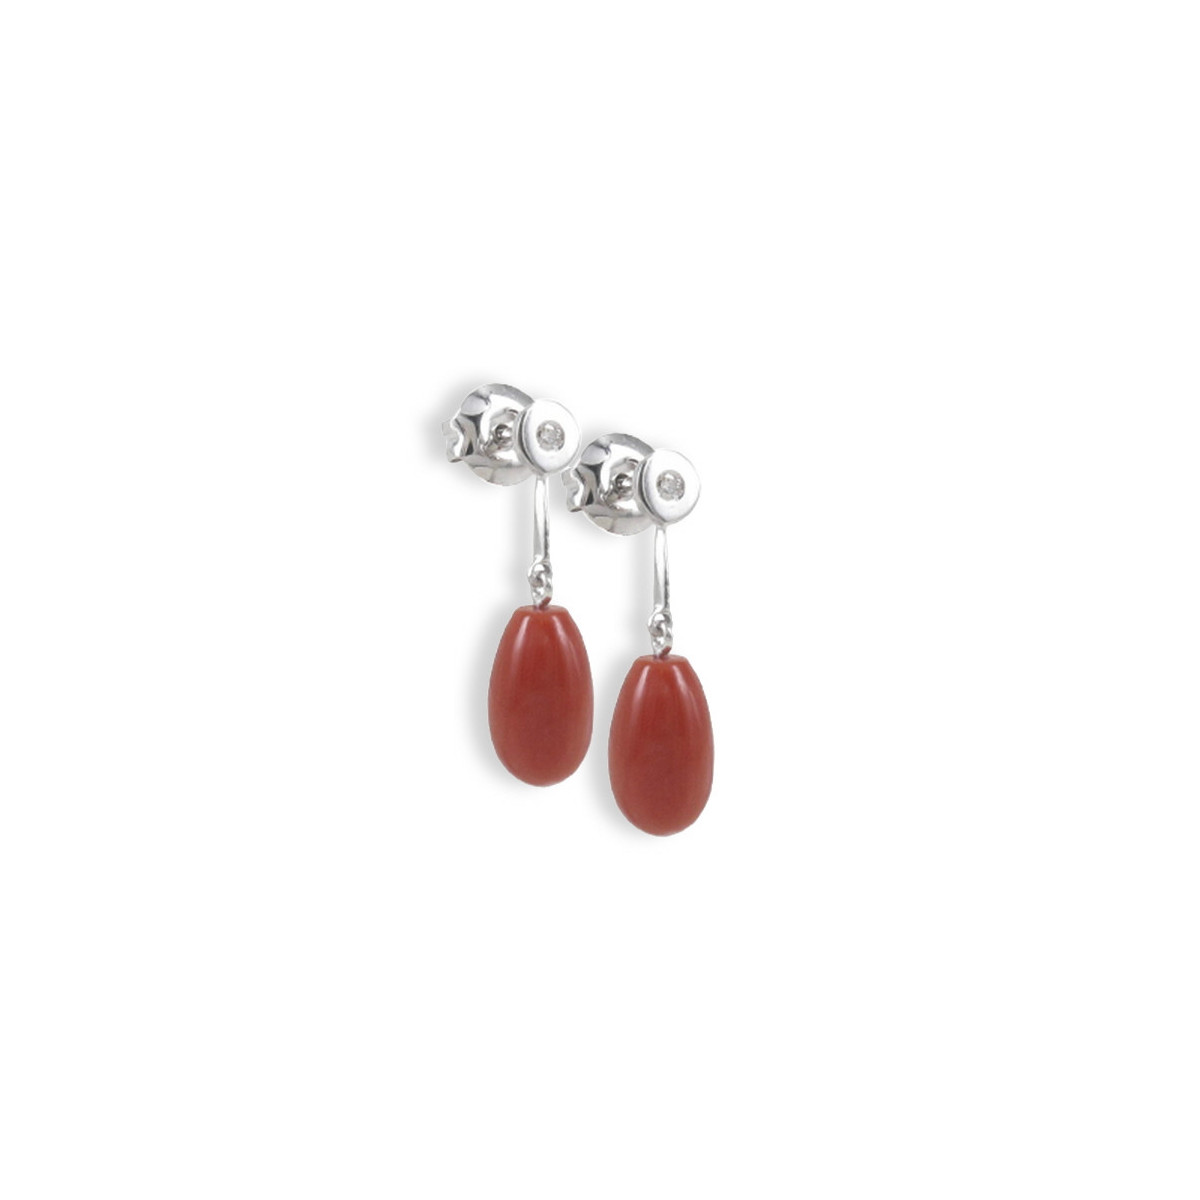 GOLD DIAMOND AND CORAL EARRINGS